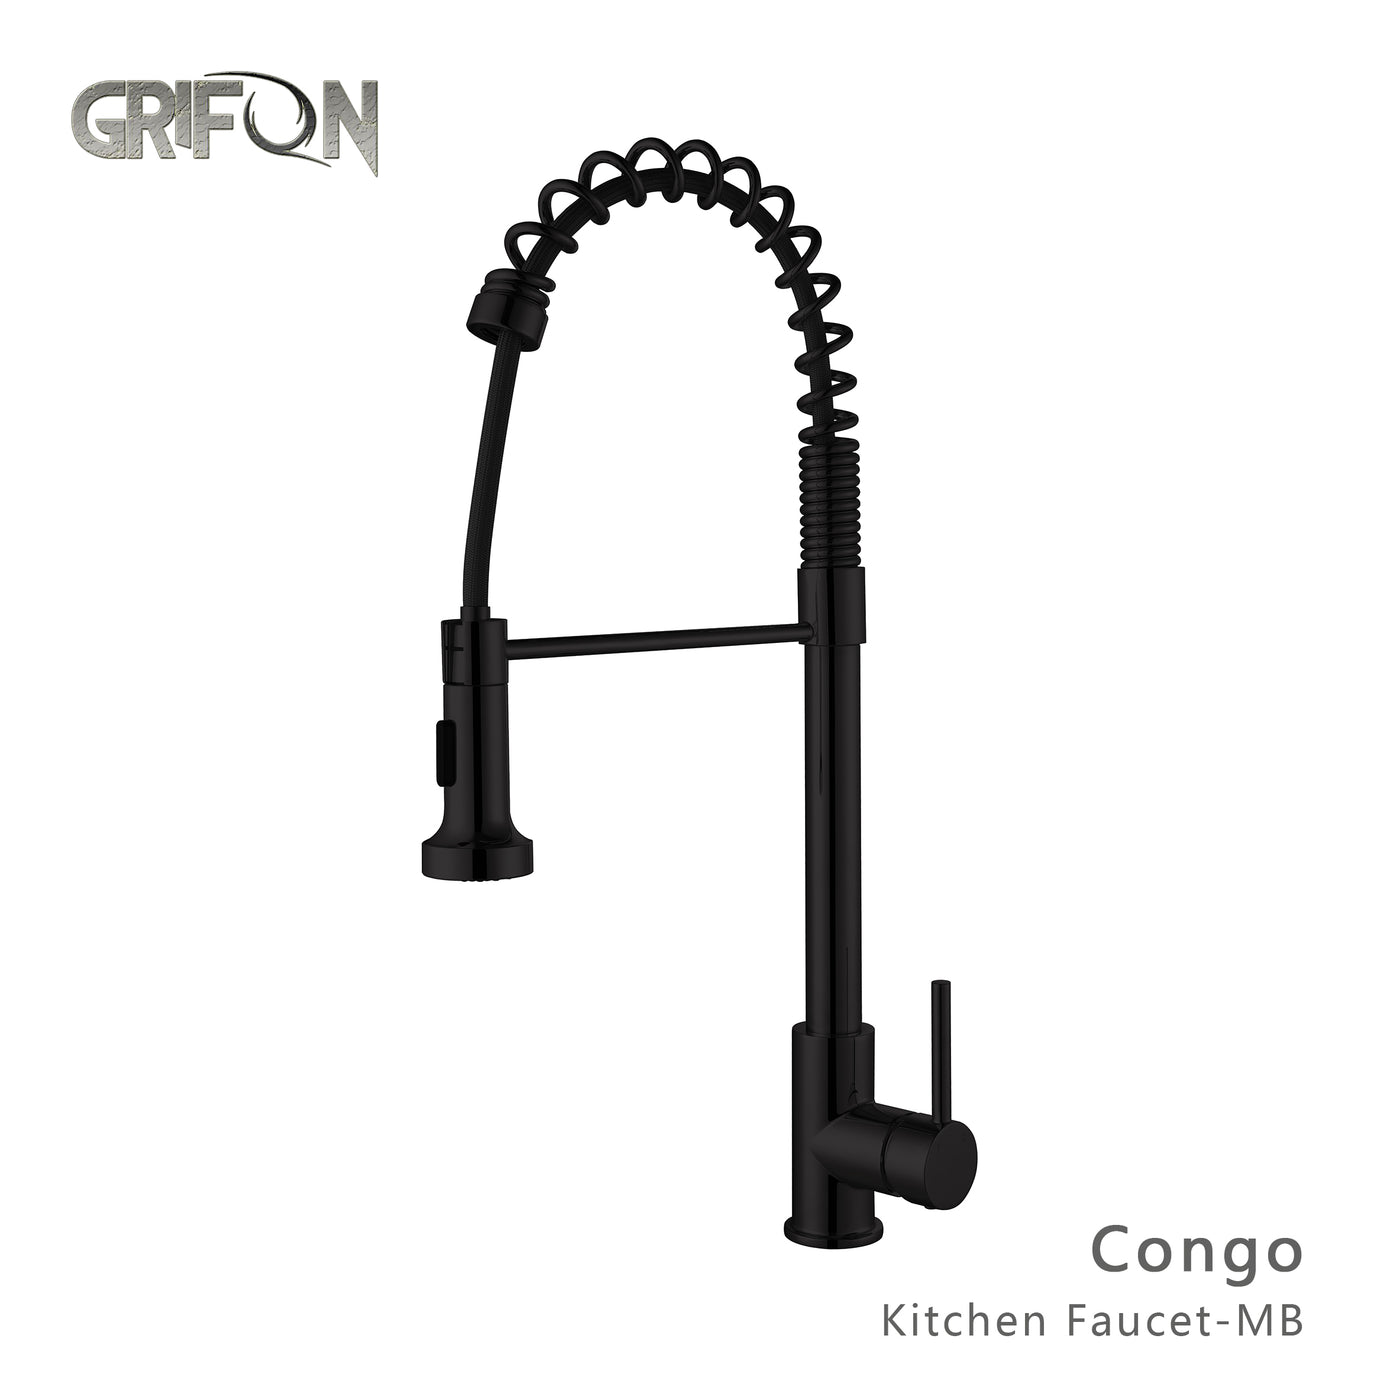 CONGO™ GF409 Commercial Style Single-Handle Kitchen Sink Faucet with Pull-Down Sprayer